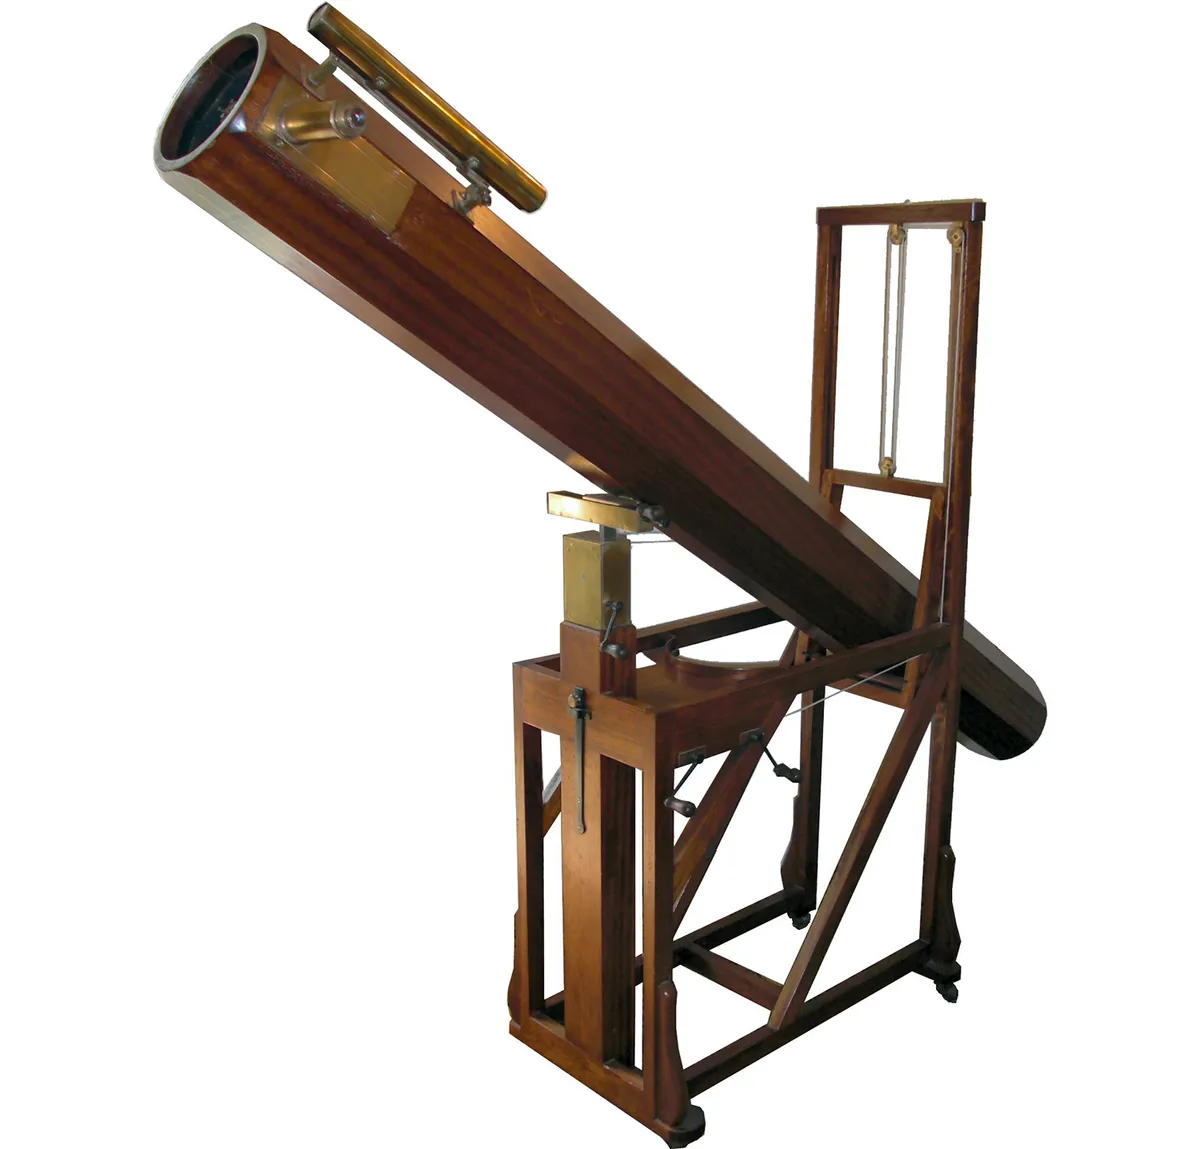 A replica of the telescope with which Herschel discovered Uranus, on display at the Herschel Museum of Astronomy in Bath, UK. Credit: Mike Young (https://en.wikipedia.org/wiki/William_Herschel)